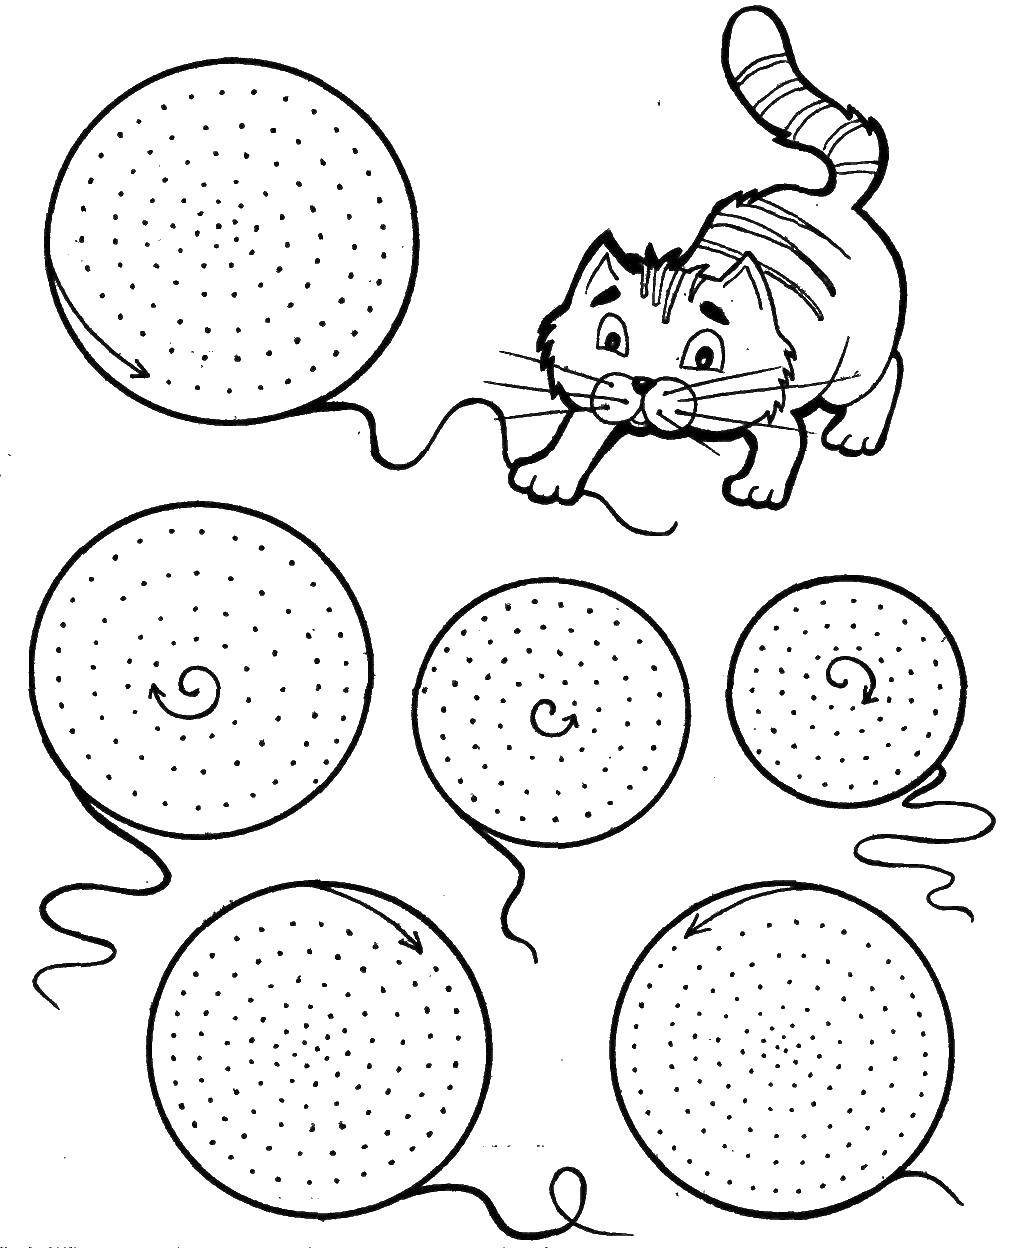 Coloring The cat and the balls. Category Crosshatch for preschoolers. Tags:  Doris, sample.